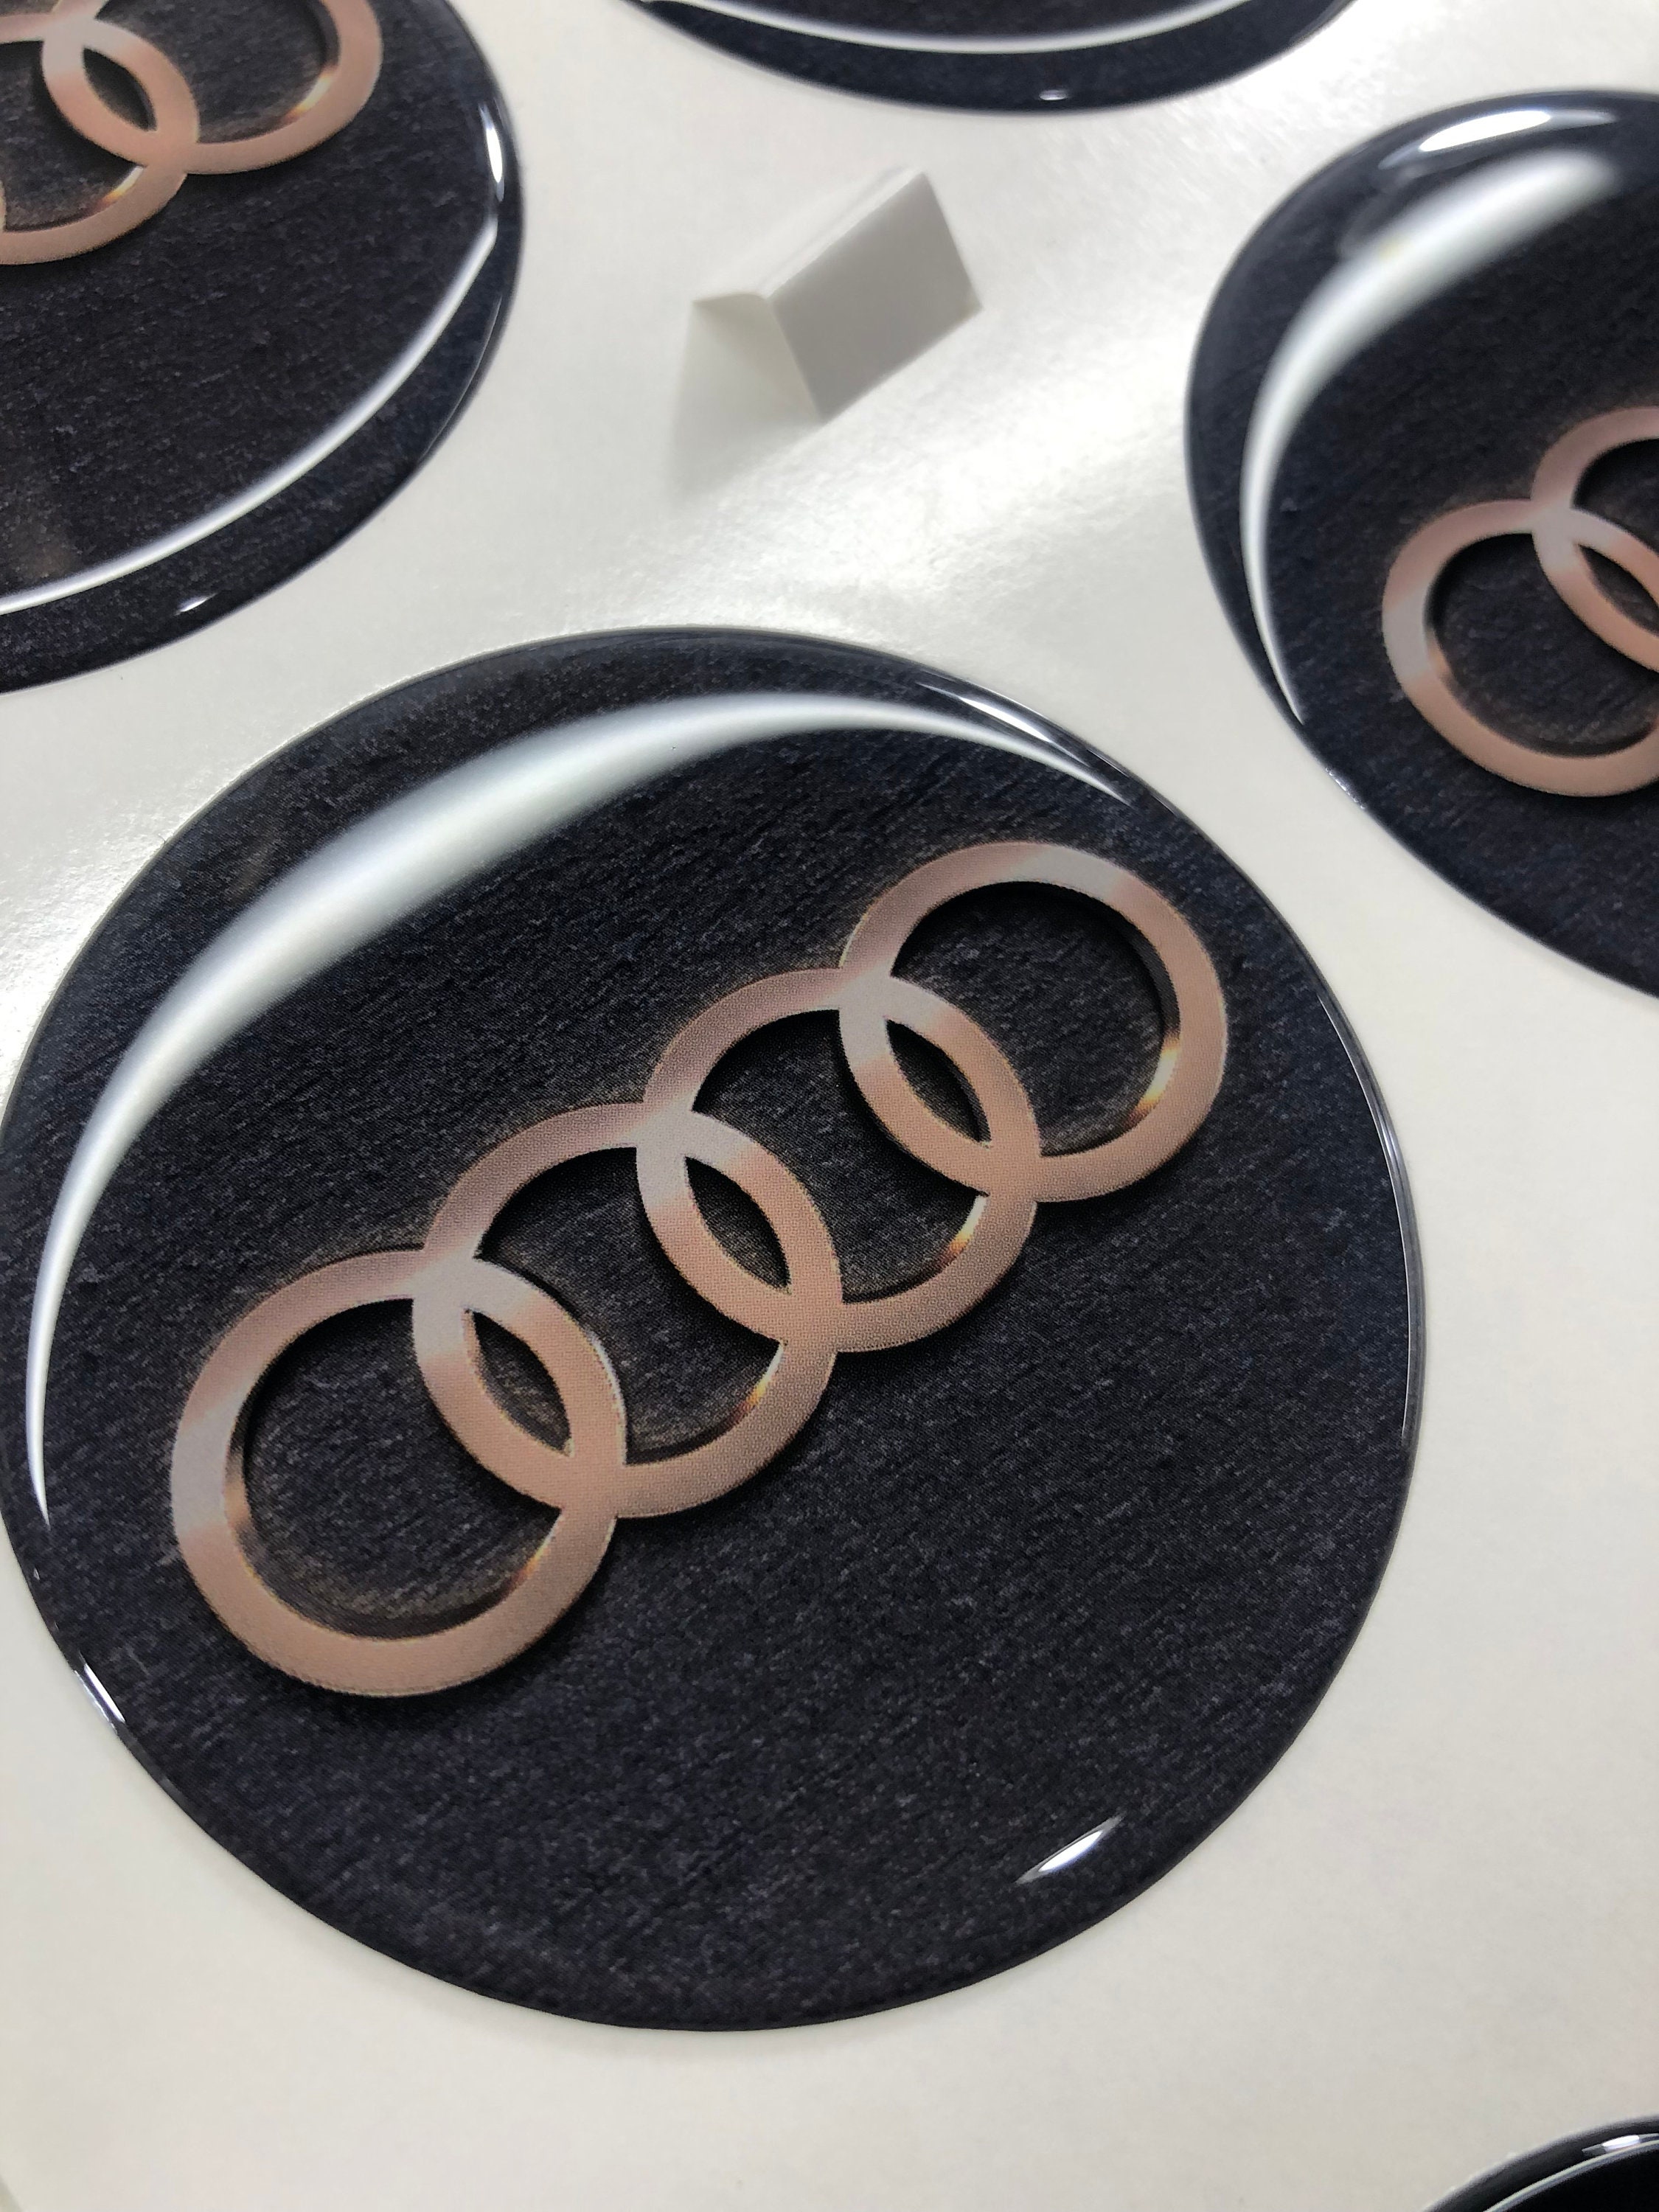 Audi S-line Domed Stickers Wheel Center Cap Classic, Wheel Emblems, Stickers